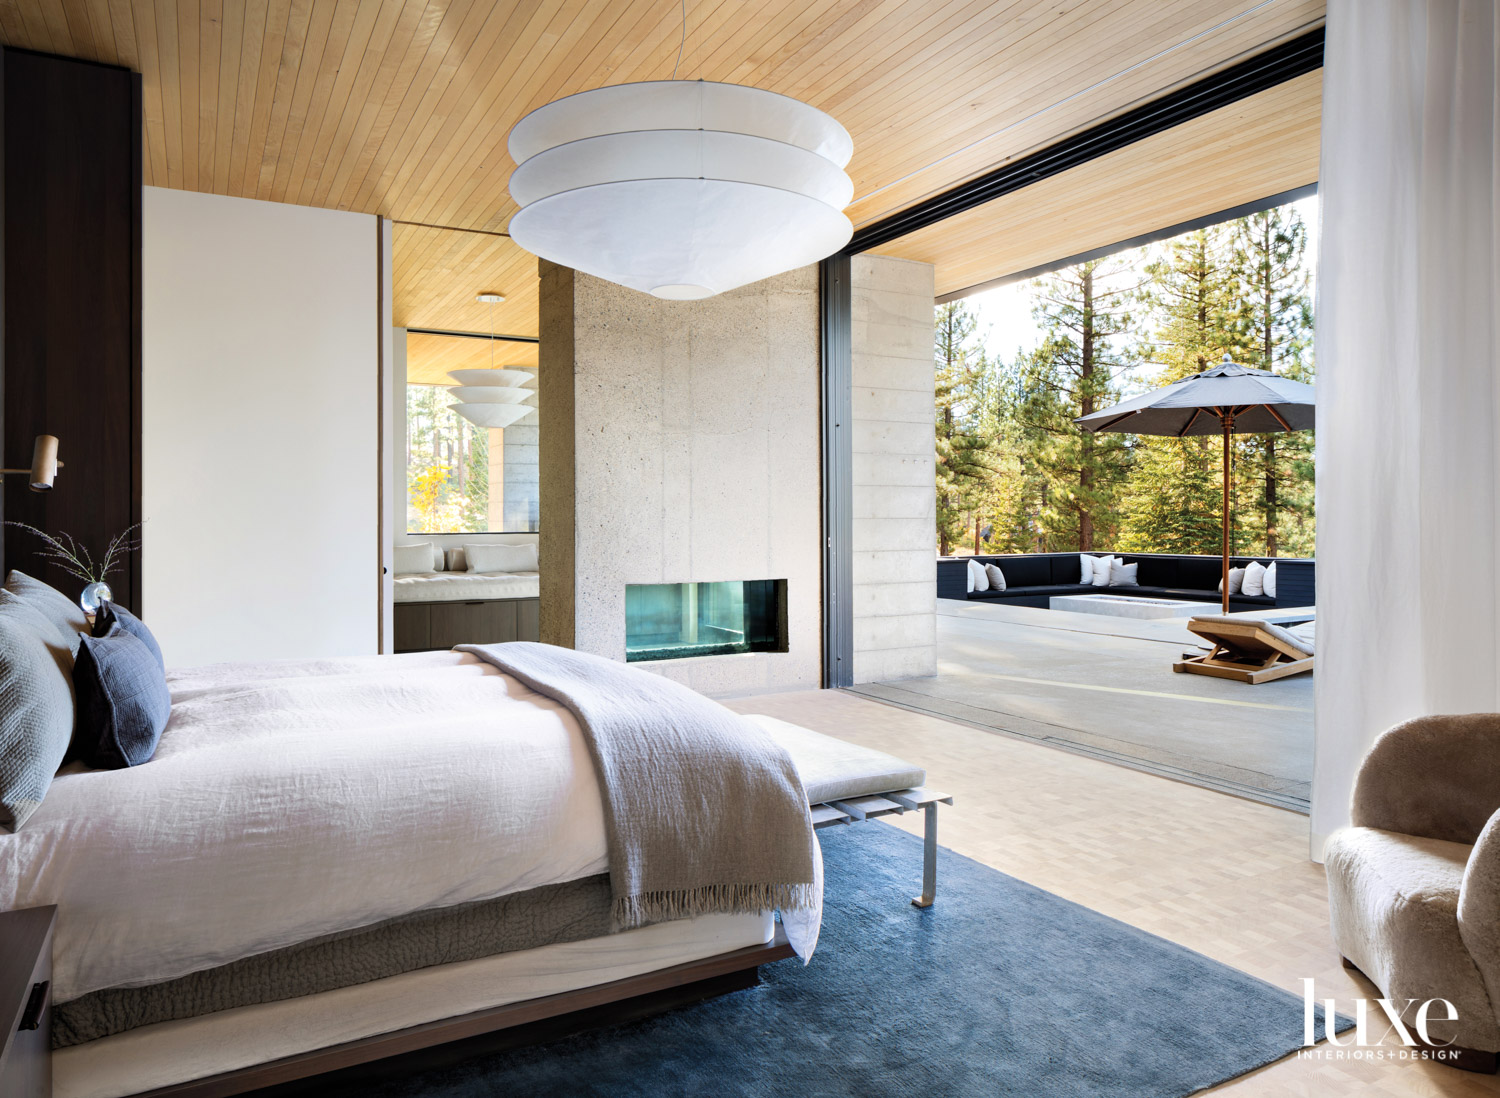 In the main zen bedroom, a bed faces the view.